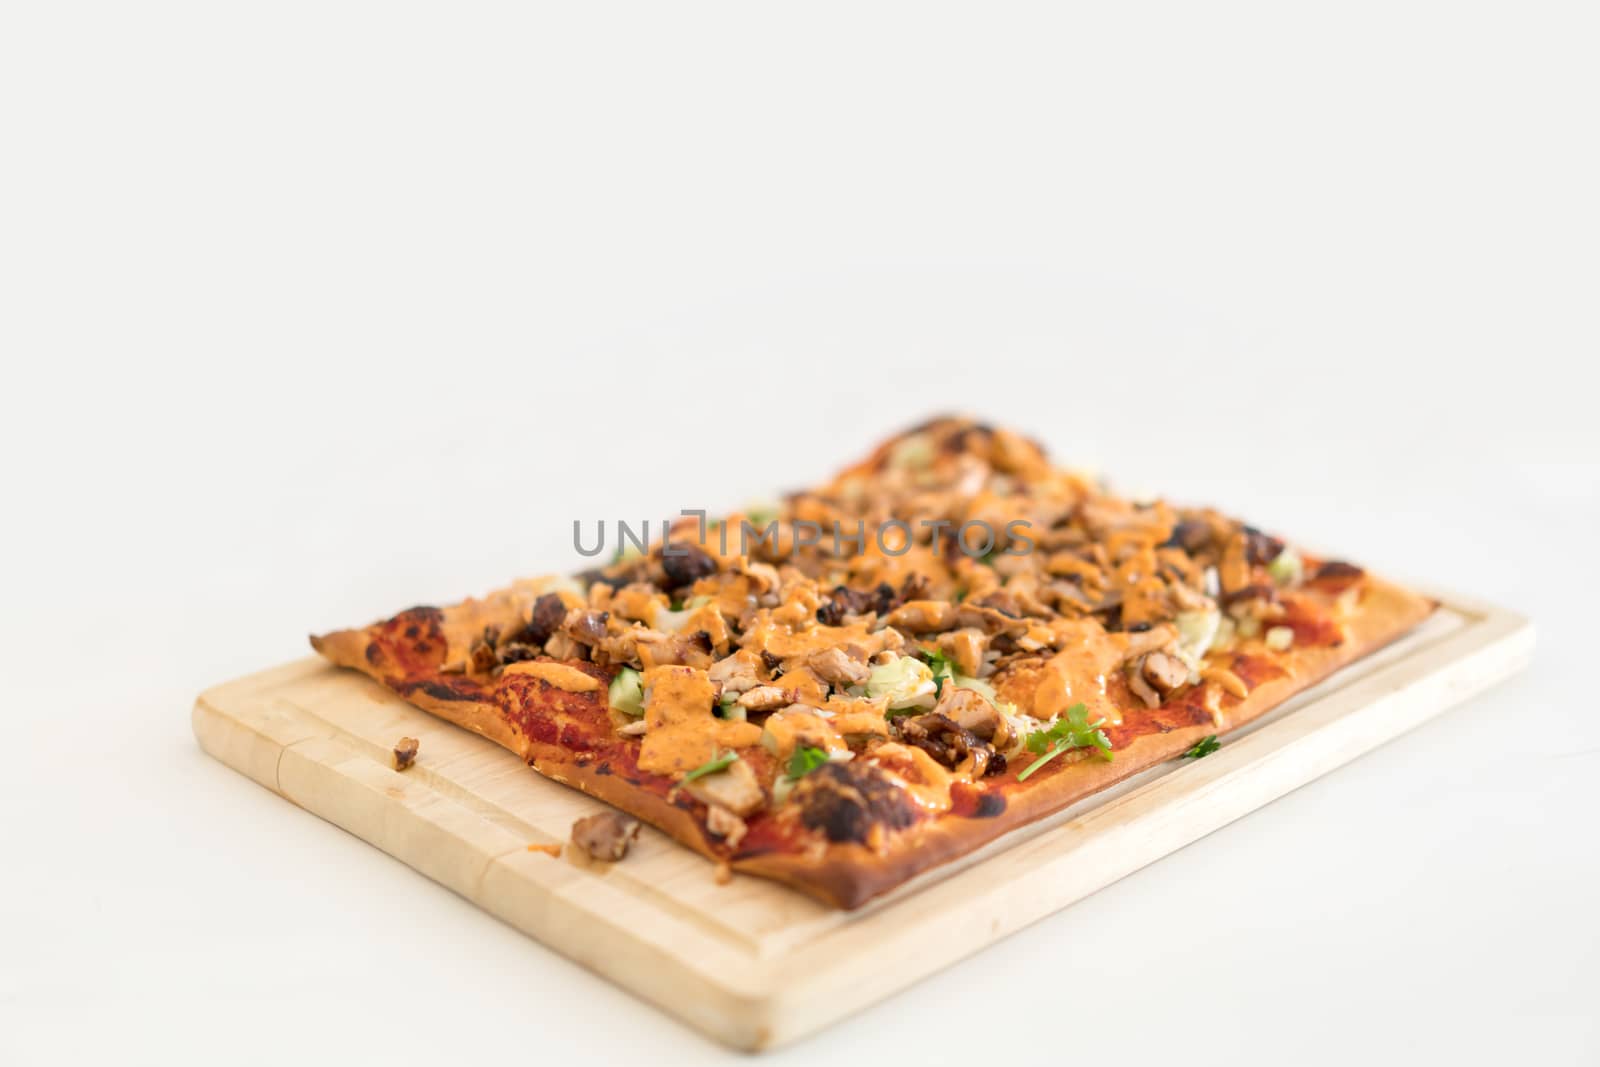 Homemade pizza on wooden plate, copy space on white table surface, depth of field effect